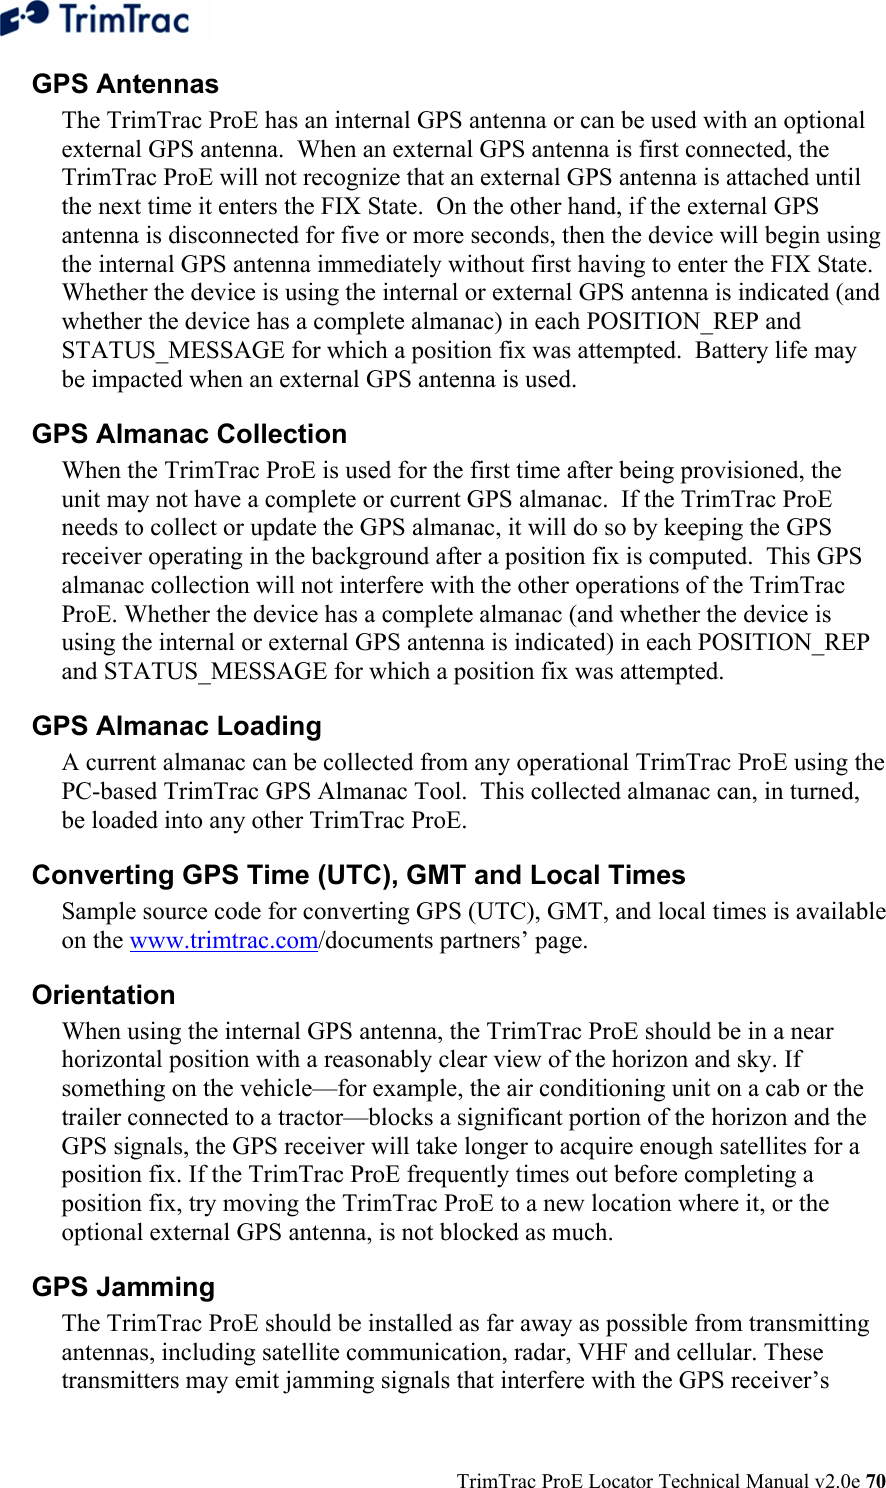  TrimTrac ProE Locator Technical Manual v2.0e 70 GPS Antennas  The TrimTrac ProE has an internal GPS antenna or can be used with an optional external GPS antenna.  When an external GPS antenna is first connected, the TrimTrac ProE will not recognize that an external GPS antenna is attached until the next time it enters the FIX State.  On the other hand, if the external GPS antenna is disconnected for five or more seconds, then the device will begin using the internal GPS antenna immediately without first having to enter the FIX State.  Whether the device is using the internal or external GPS antenna is indicated (and whether the device has a complete almanac) in each POSITION_REP and STATUS_MESSAGE for which a position fix was attempted.  Battery life may be impacted when an external GPS antenna is used. GPS Almanac Collection When the TrimTrac ProE is used for the first time after being provisioned, the unit may not have a complete or current GPS almanac.  If the TrimTrac ProE needs to collect or update the GPS almanac, it will do so by keeping the GPS receiver operating in the background after a position fix is computed.  This GPS almanac collection will not interfere with the other operations of the TrimTrac ProE. Whether the device has a complete almanac (and whether the device is using the internal or external GPS antenna is indicated) in each POSITION_REP and STATUS_MESSAGE for which a position fix was attempted. GPS Almanac Loading A current almanac can be collected from any operational TrimTrac ProE using the PC-based TrimTrac GPS Almanac Tool.  This collected almanac can, in turned, be loaded into any other TrimTrac ProE. Converting GPS Time (UTC), GMT and Local Times   Sample source code for converting GPS (UTC), GMT, and local times is available on the www.trimtrac.com/documents partners’ page.   Orientation  When using the internal GPS antenna, the TrimTrac ProE should be in a near horizontal position with a reasonably clear view of the horizon and sky. If something on the vehicle—for example, the air conditioning unit on a cab or the trailer connected to a tractor—blocks a significant portion of the horizon and the GPS signals, the GPS receiver will take longer to acquire enough satellites for a position fix. If the TrimTrac ProE frequently times out before completing a position fix, try moving the TrimTrac ProE to a new location where it, or the optional external GPS antenna, is not blocked as much. GPS Jamming  The TrimTrac ProE should be installed as far away as possible from transmitting antennas, including satellite communication, radar, VHF and cellular. These transmitters may emit jamming signals that interfere with the GPS receiver’s 